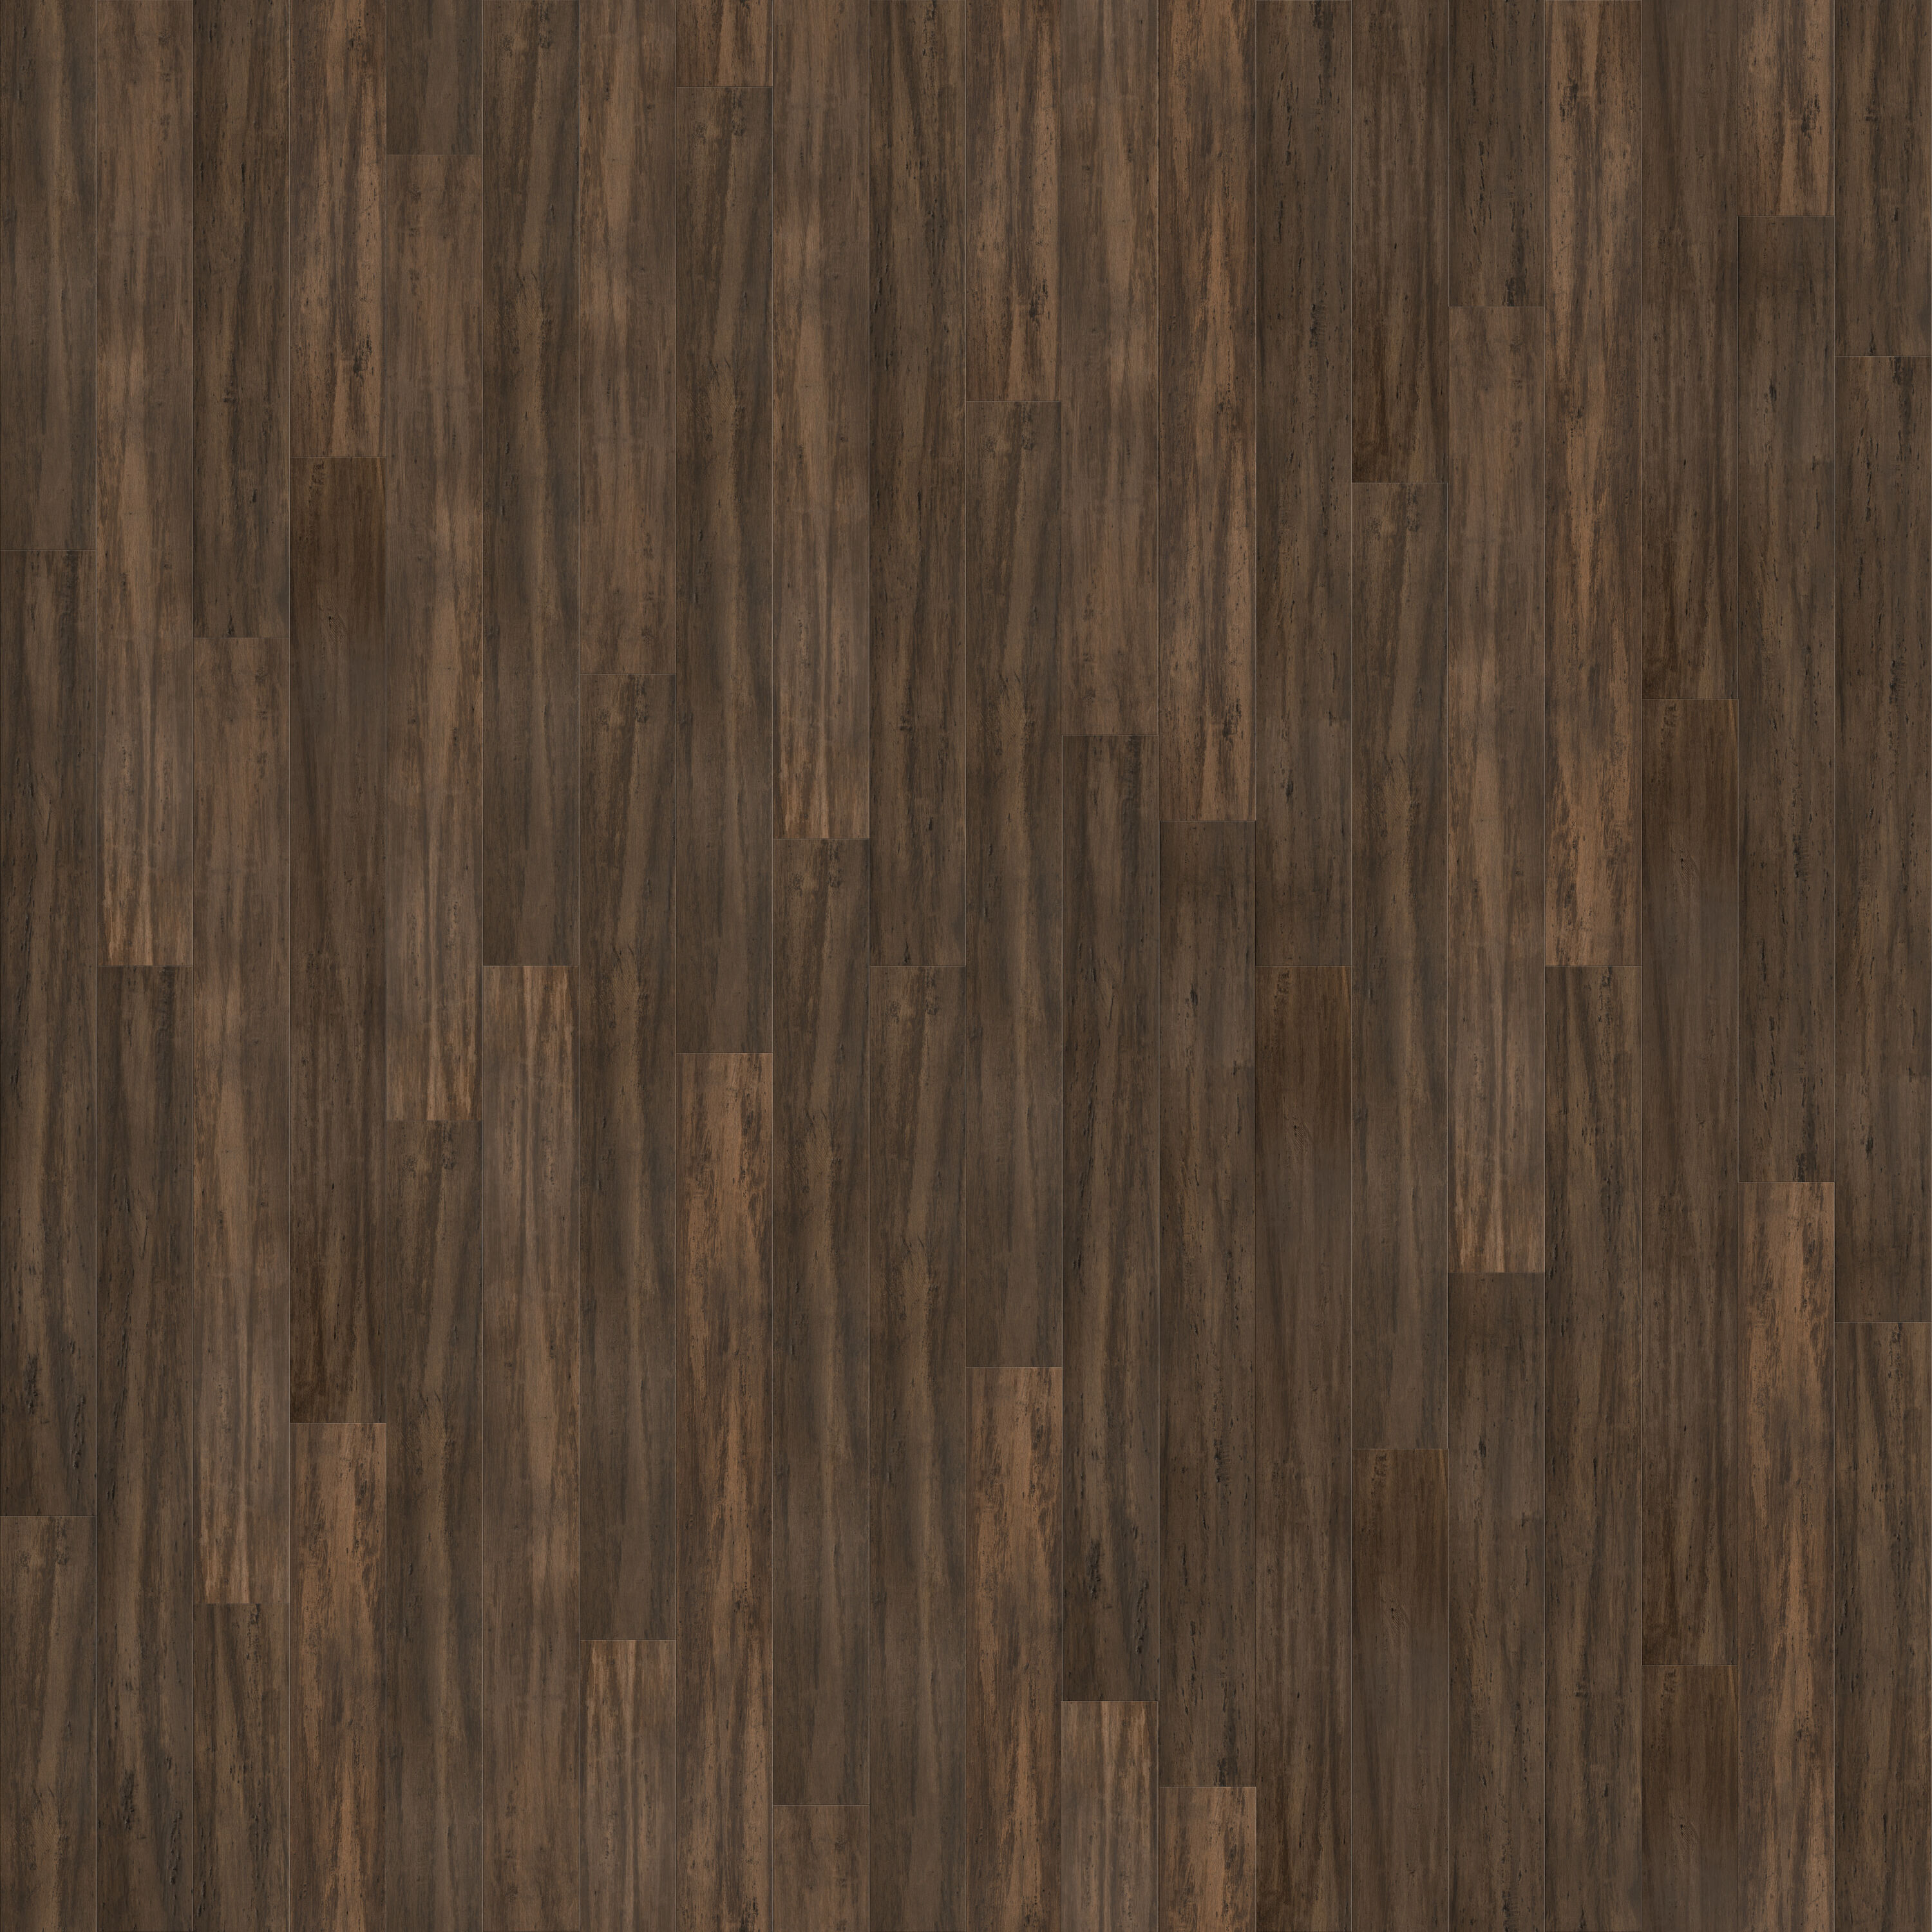 Fossilized Treehouse Bamboo 5-5/16-in W x 9/16-in T x Distressed Engineered Hardwood Flooring (21.5-sq ft) in Brown | - CALI 7014005200